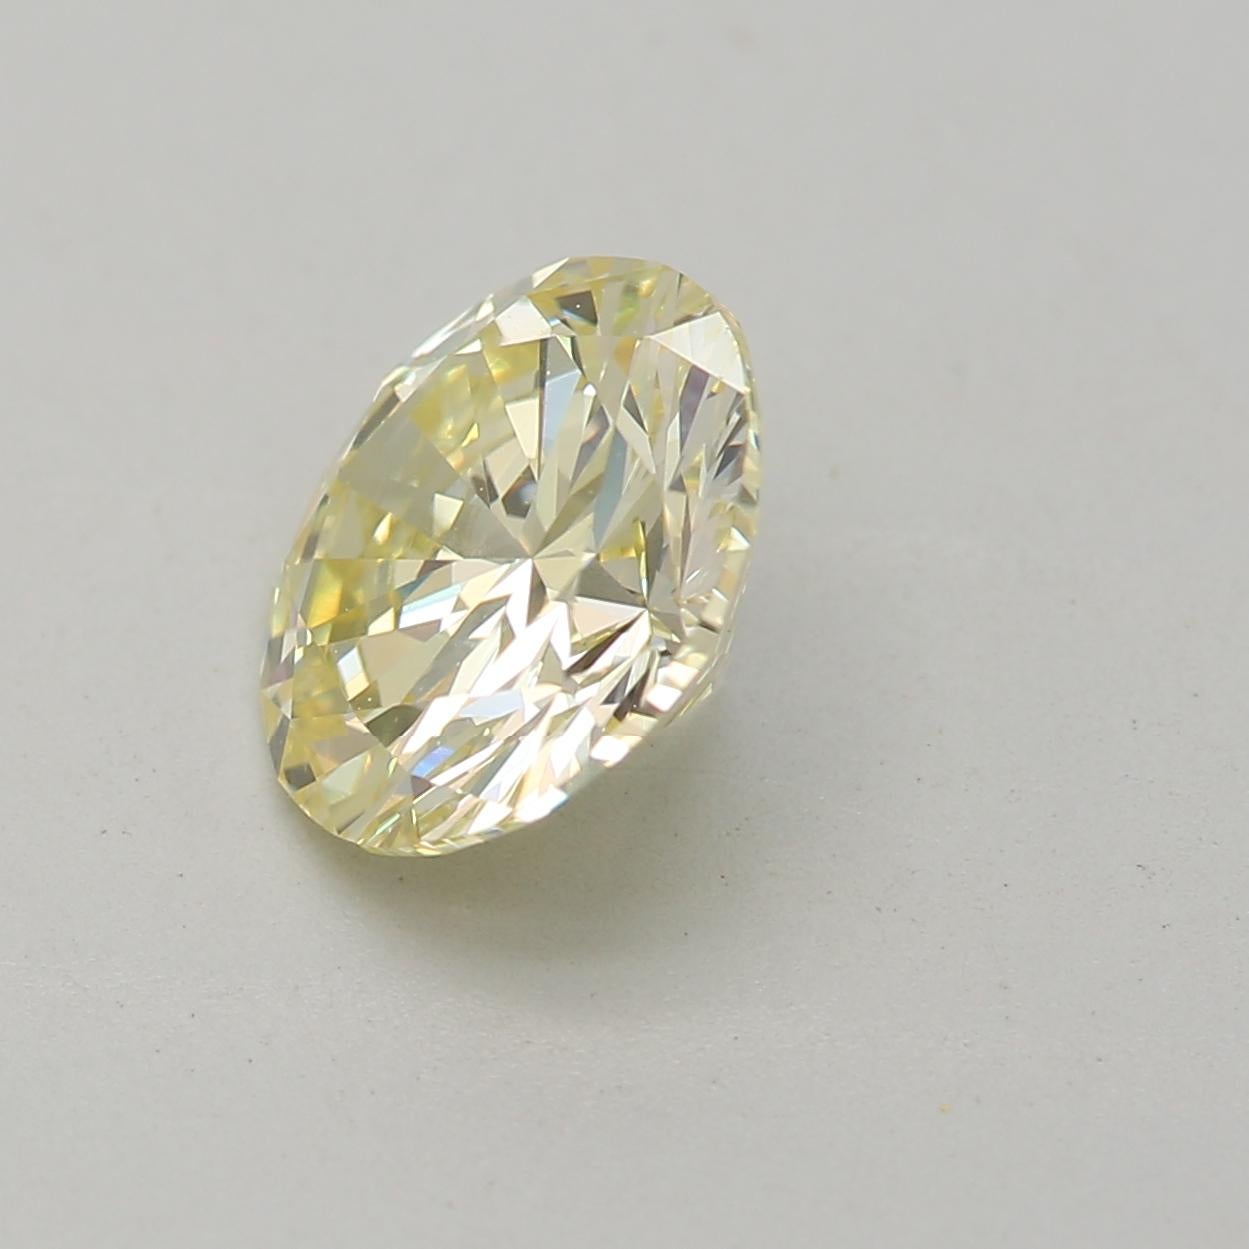 Round Cut 1.10 Carat Round cut diamond VS1 Clarity GIA Certified For Sale